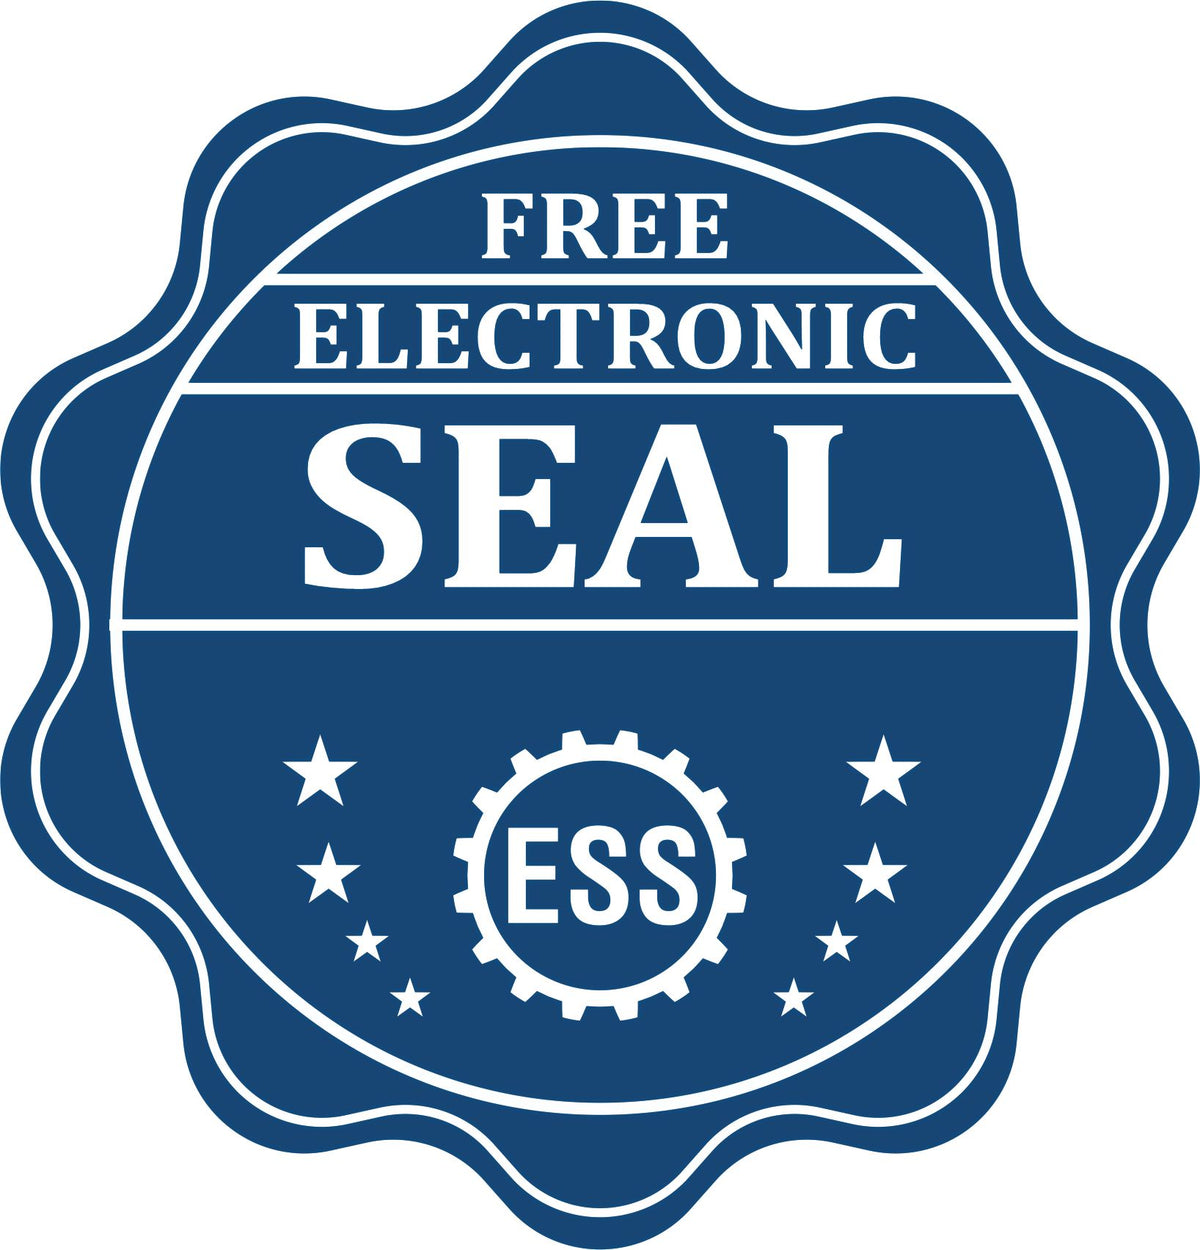 A badge showing a free electronic seal for the Hybrid South Dakota Landscape Architect Seal with stars and the ESS gear on the emblem.